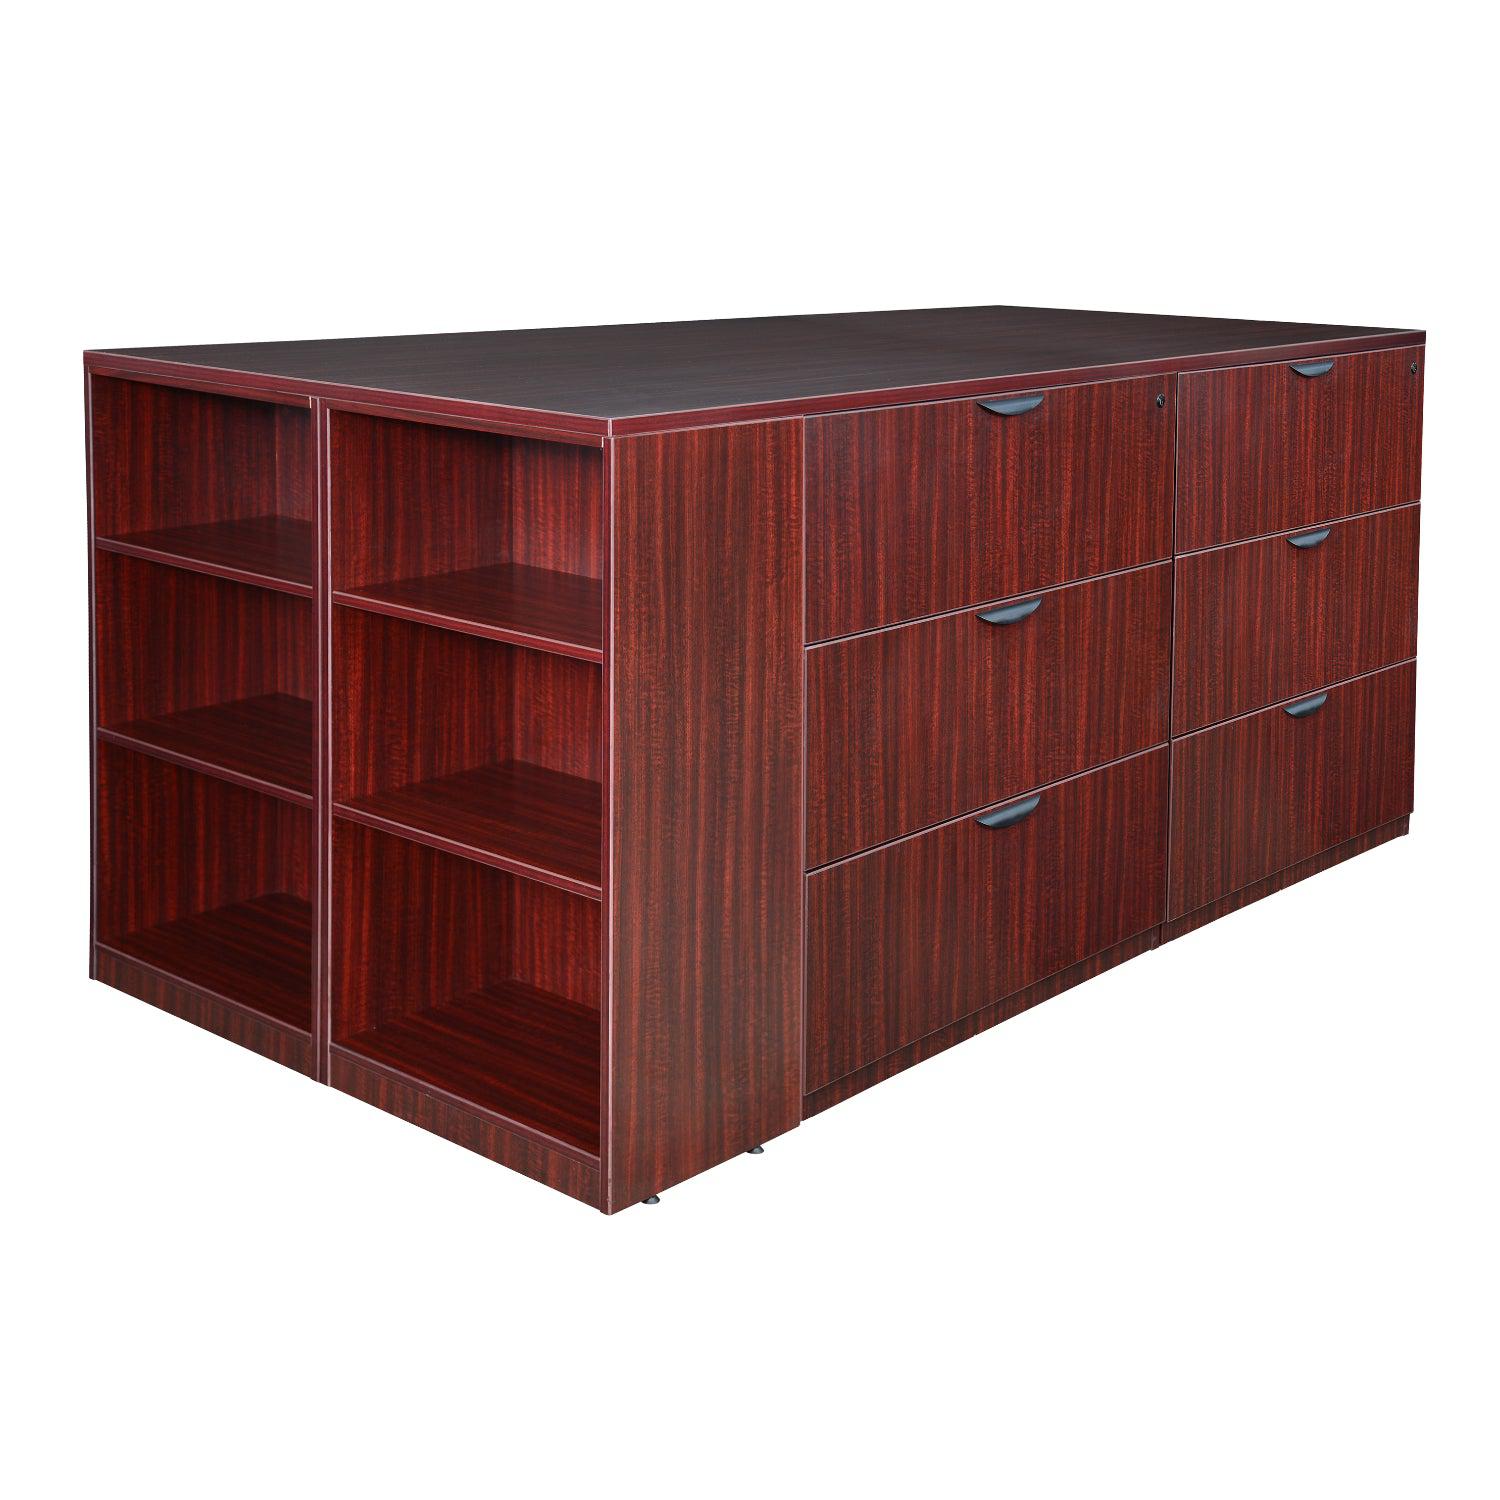 Legacy Collection Stand Up 2 Lateral File/Storage Cabinet/Desk Quad with Bookcase End